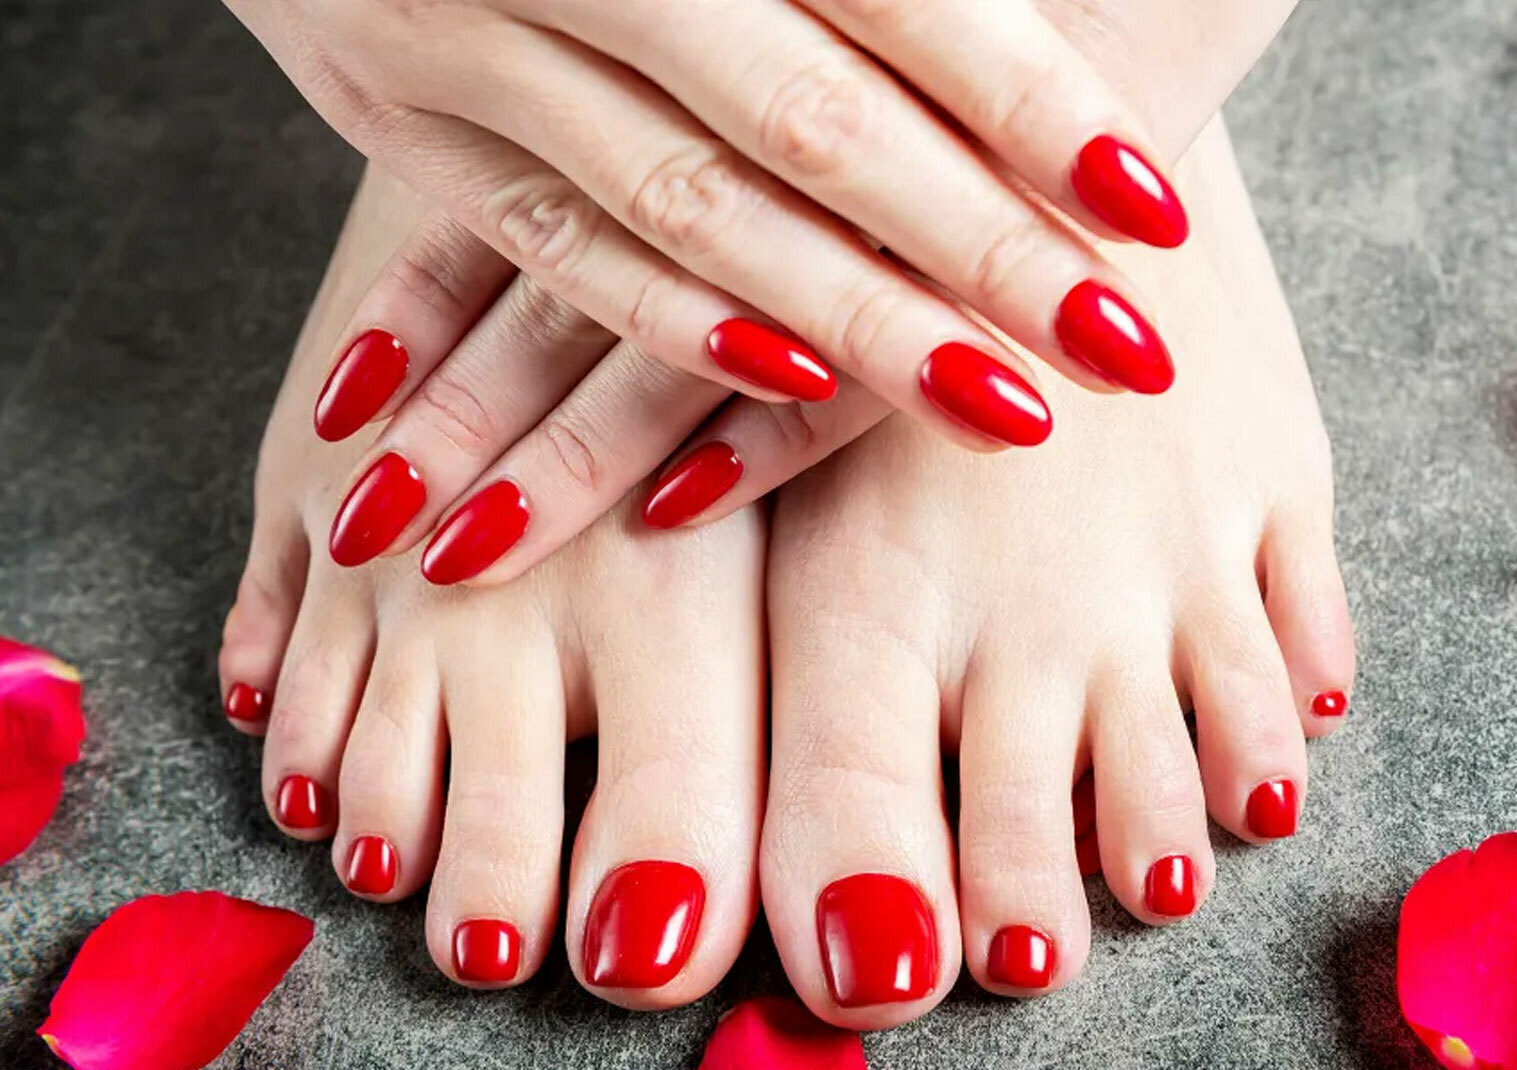 Stay Classy 30% off a Manicure With Gel Polish on Your Fingers and Toes